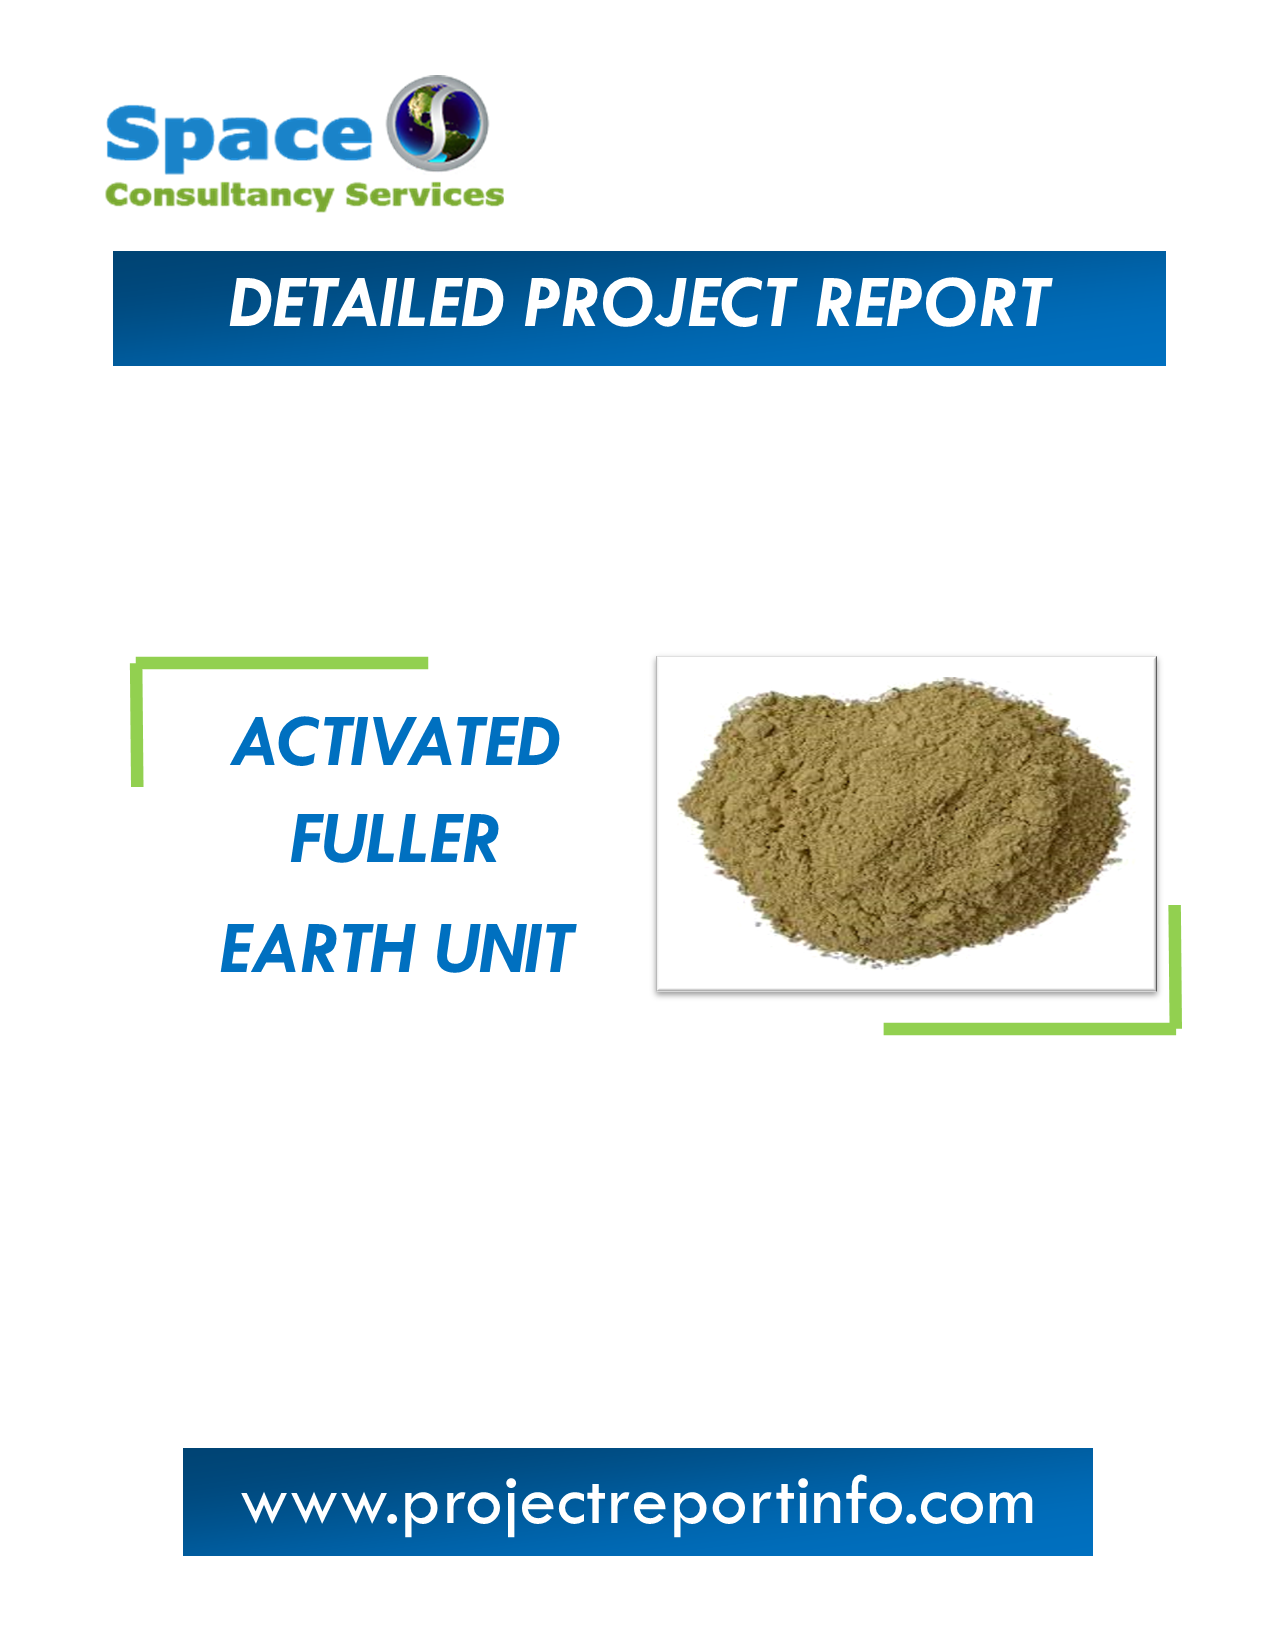 Project Report on Activated Fuller Earth Unit